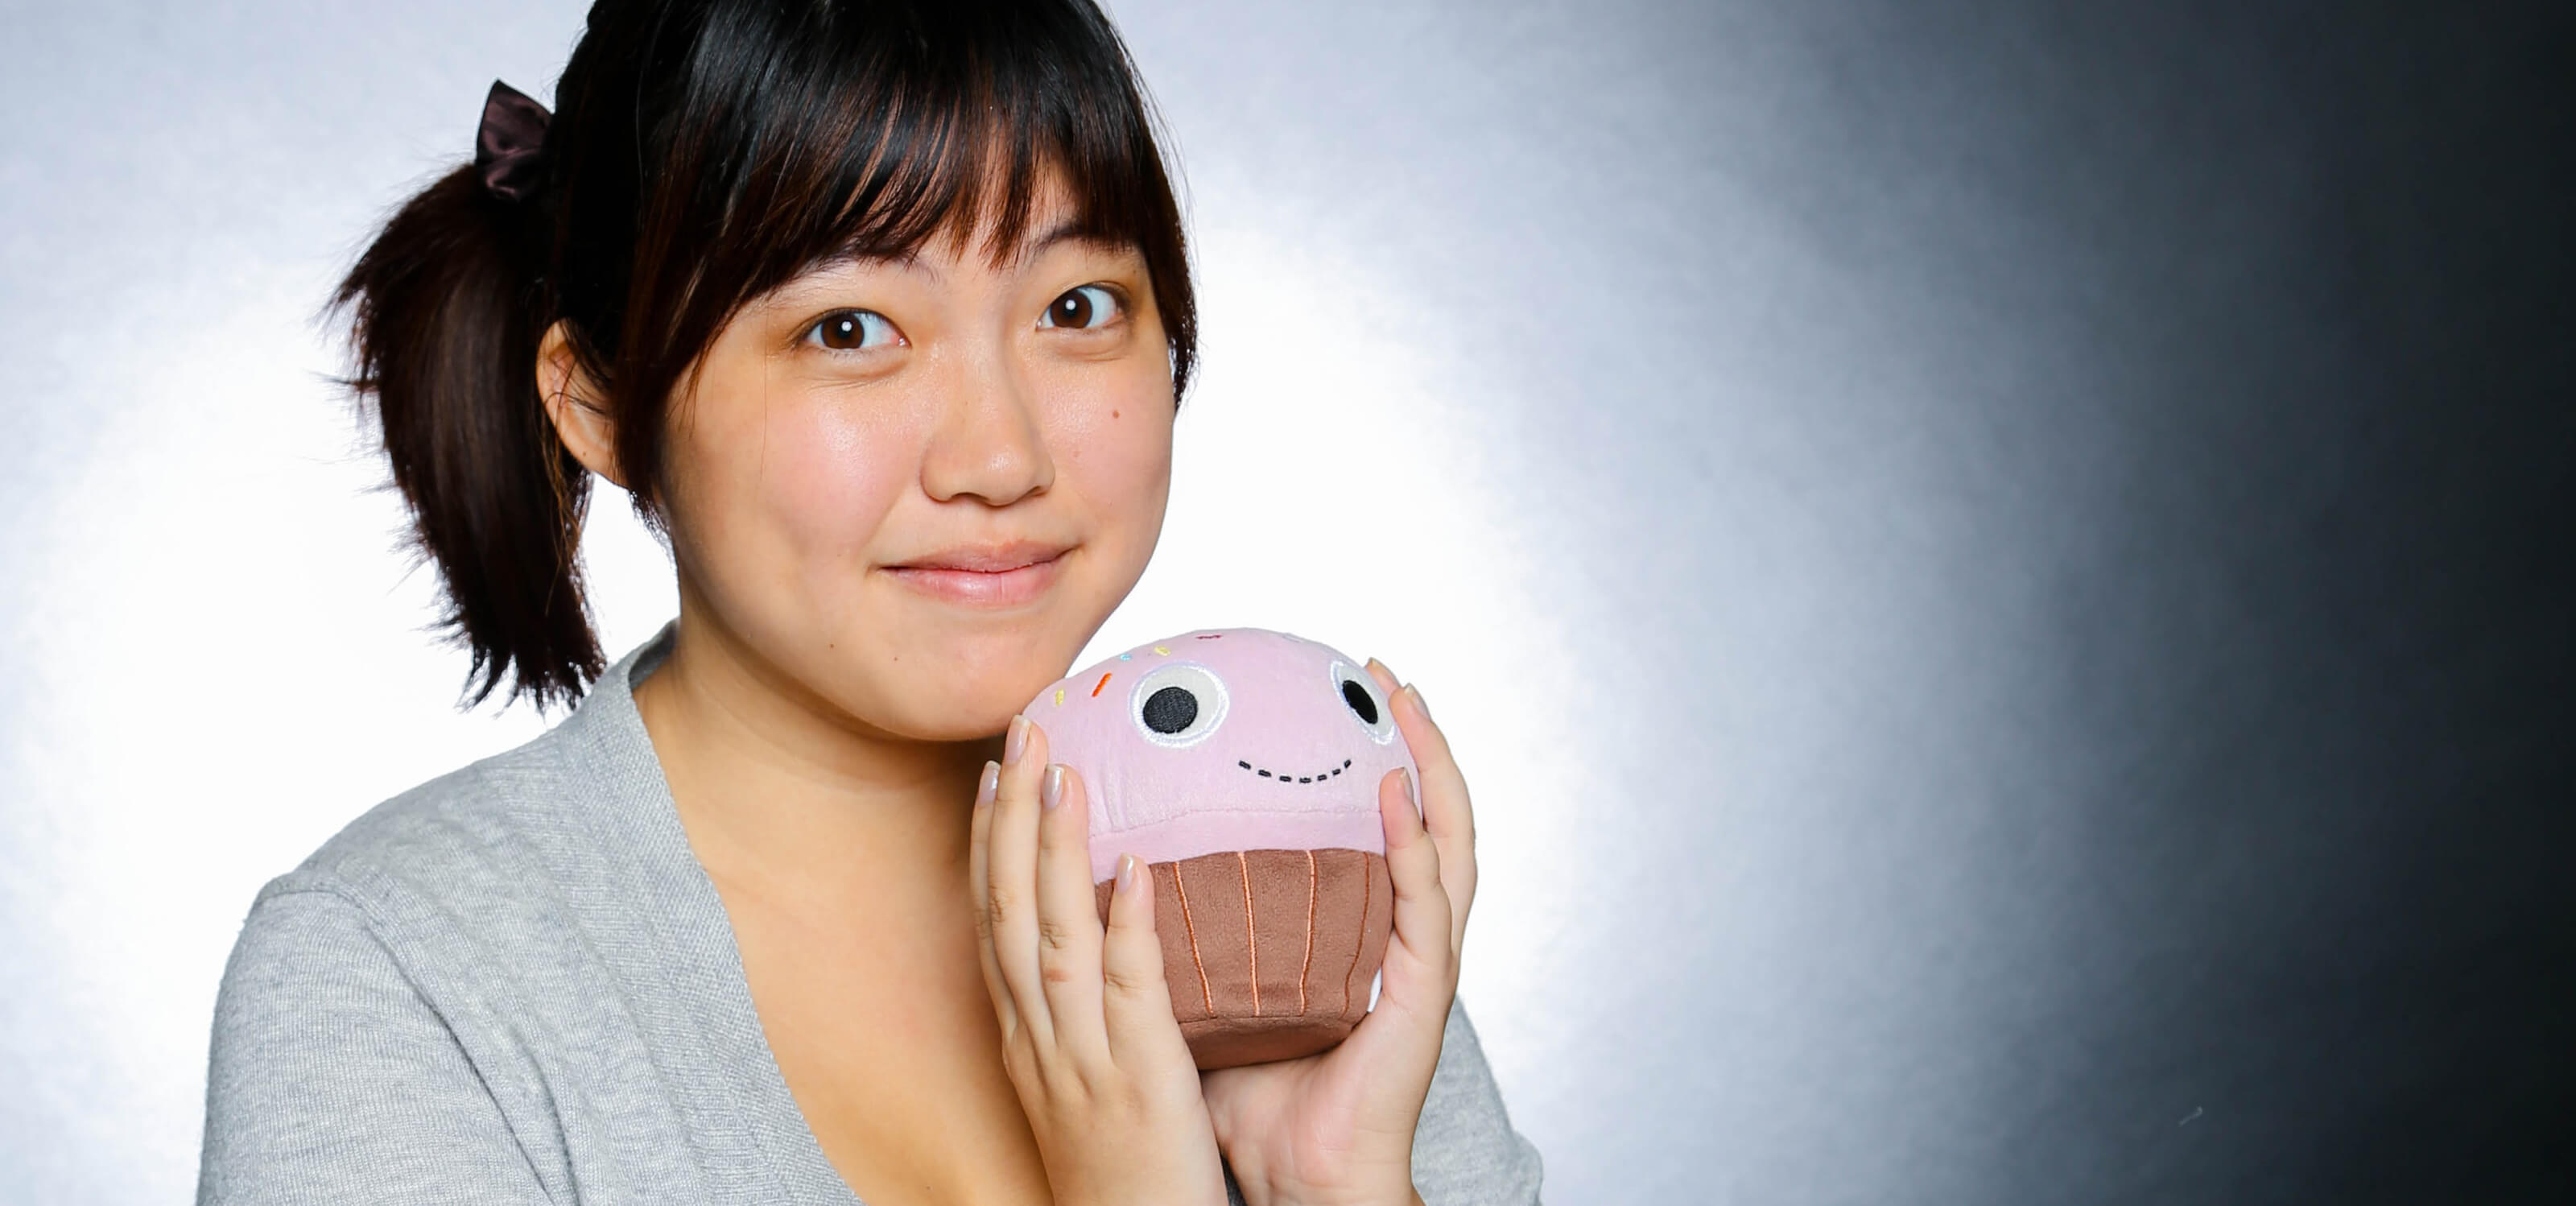 DigiPen alumna Jessica Nam posing with a cupcake-shaped plush toy